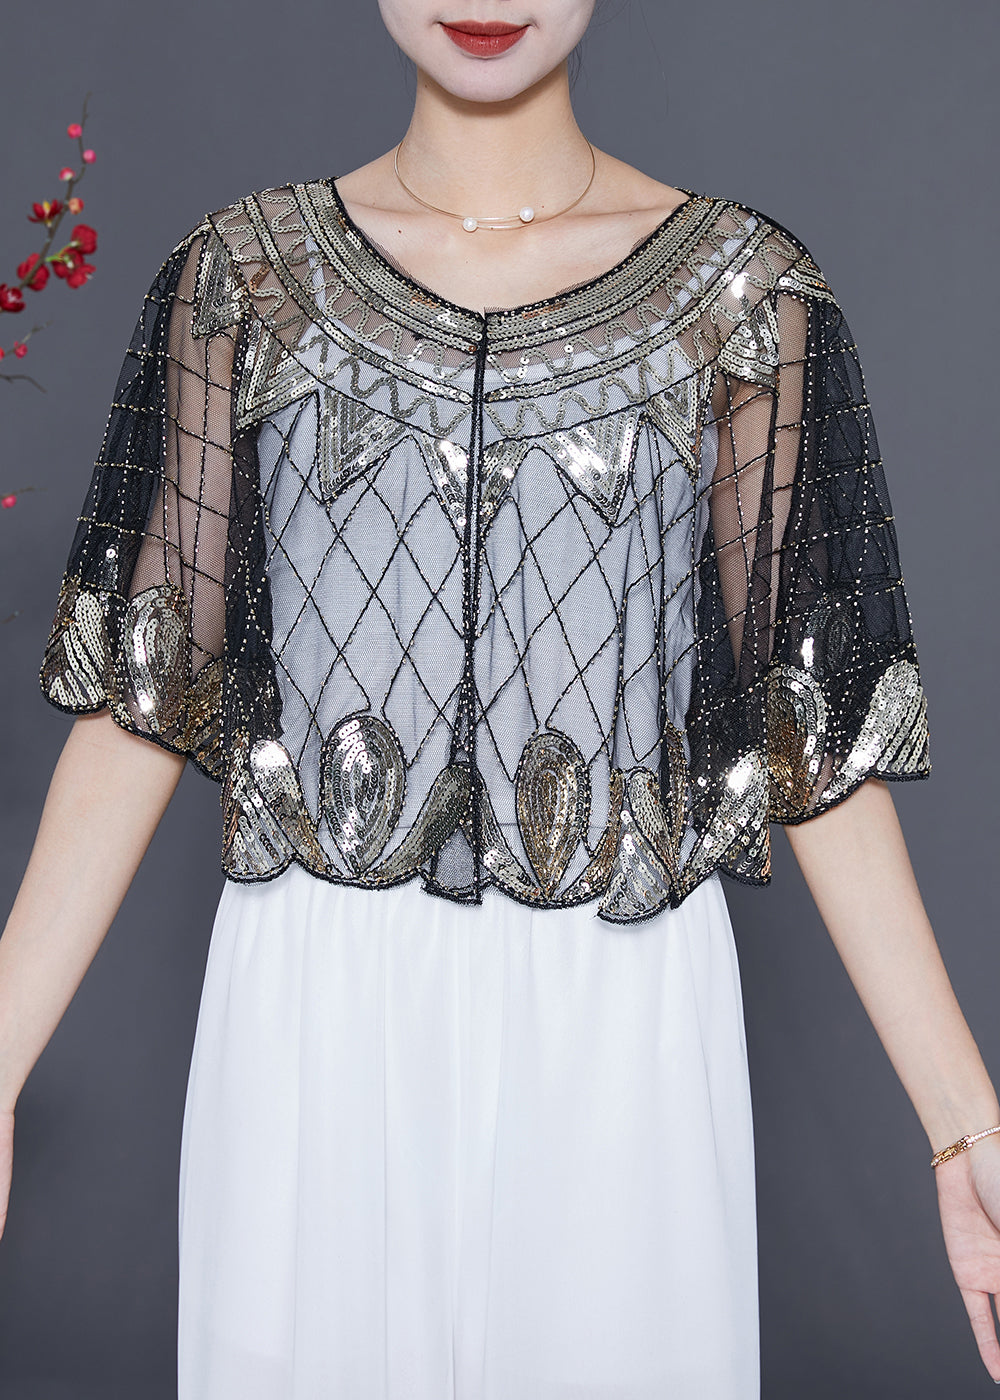 Silvery Sequins Loose Tulle Smock Embroideried Summer LY5579 - fabuloryshop